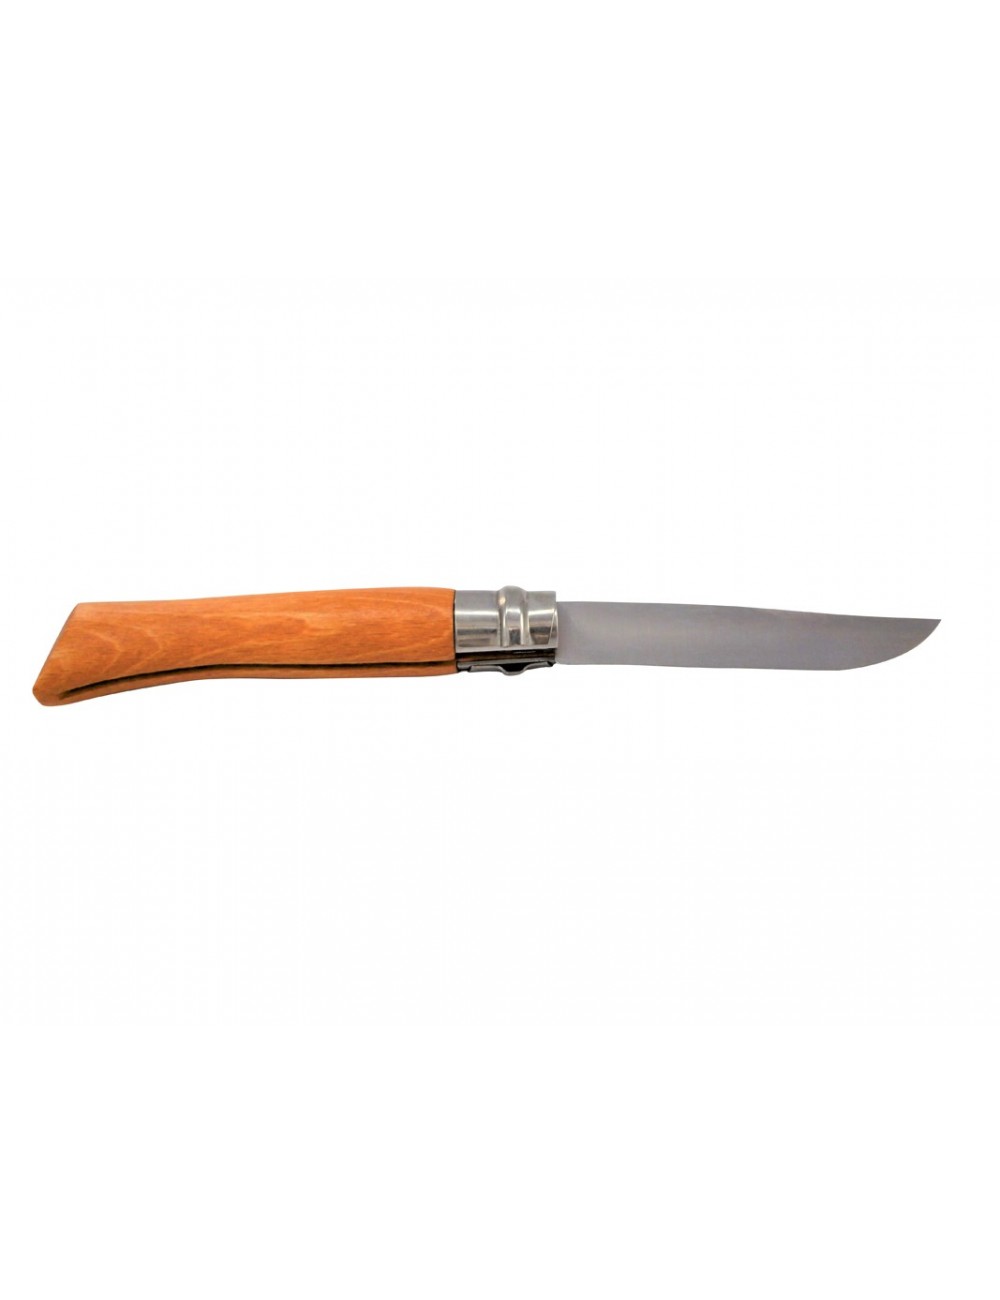 OPINEL NO. 10 KNIFE - STAINLESS STEEL - PURCHASE OF KITCHEN UTENSILS